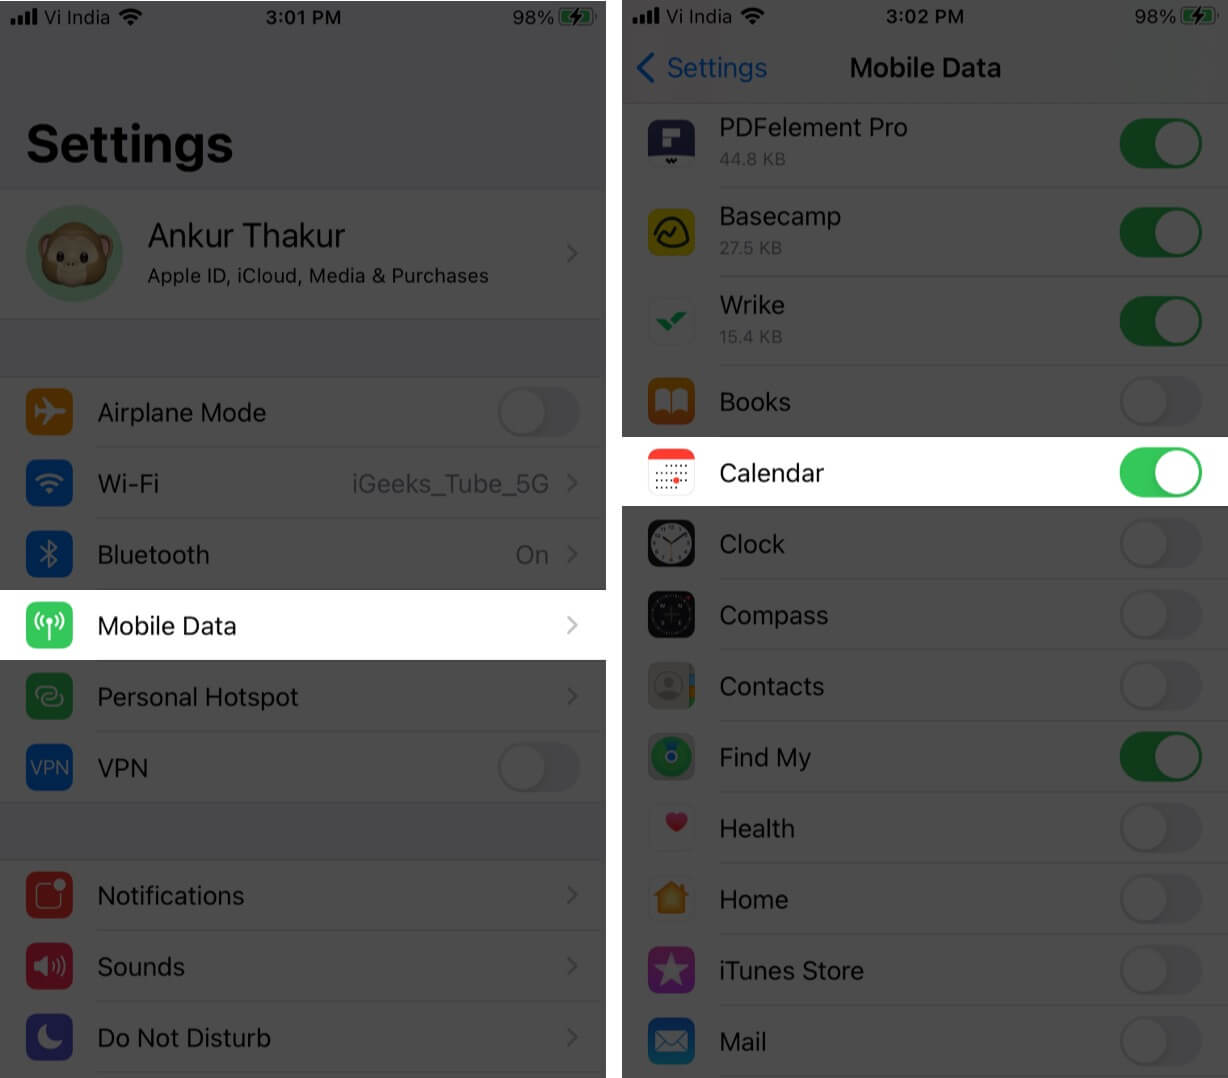 Inside iPhone Settings tap on Cellular and Ensure Data for Calendar is Enabled